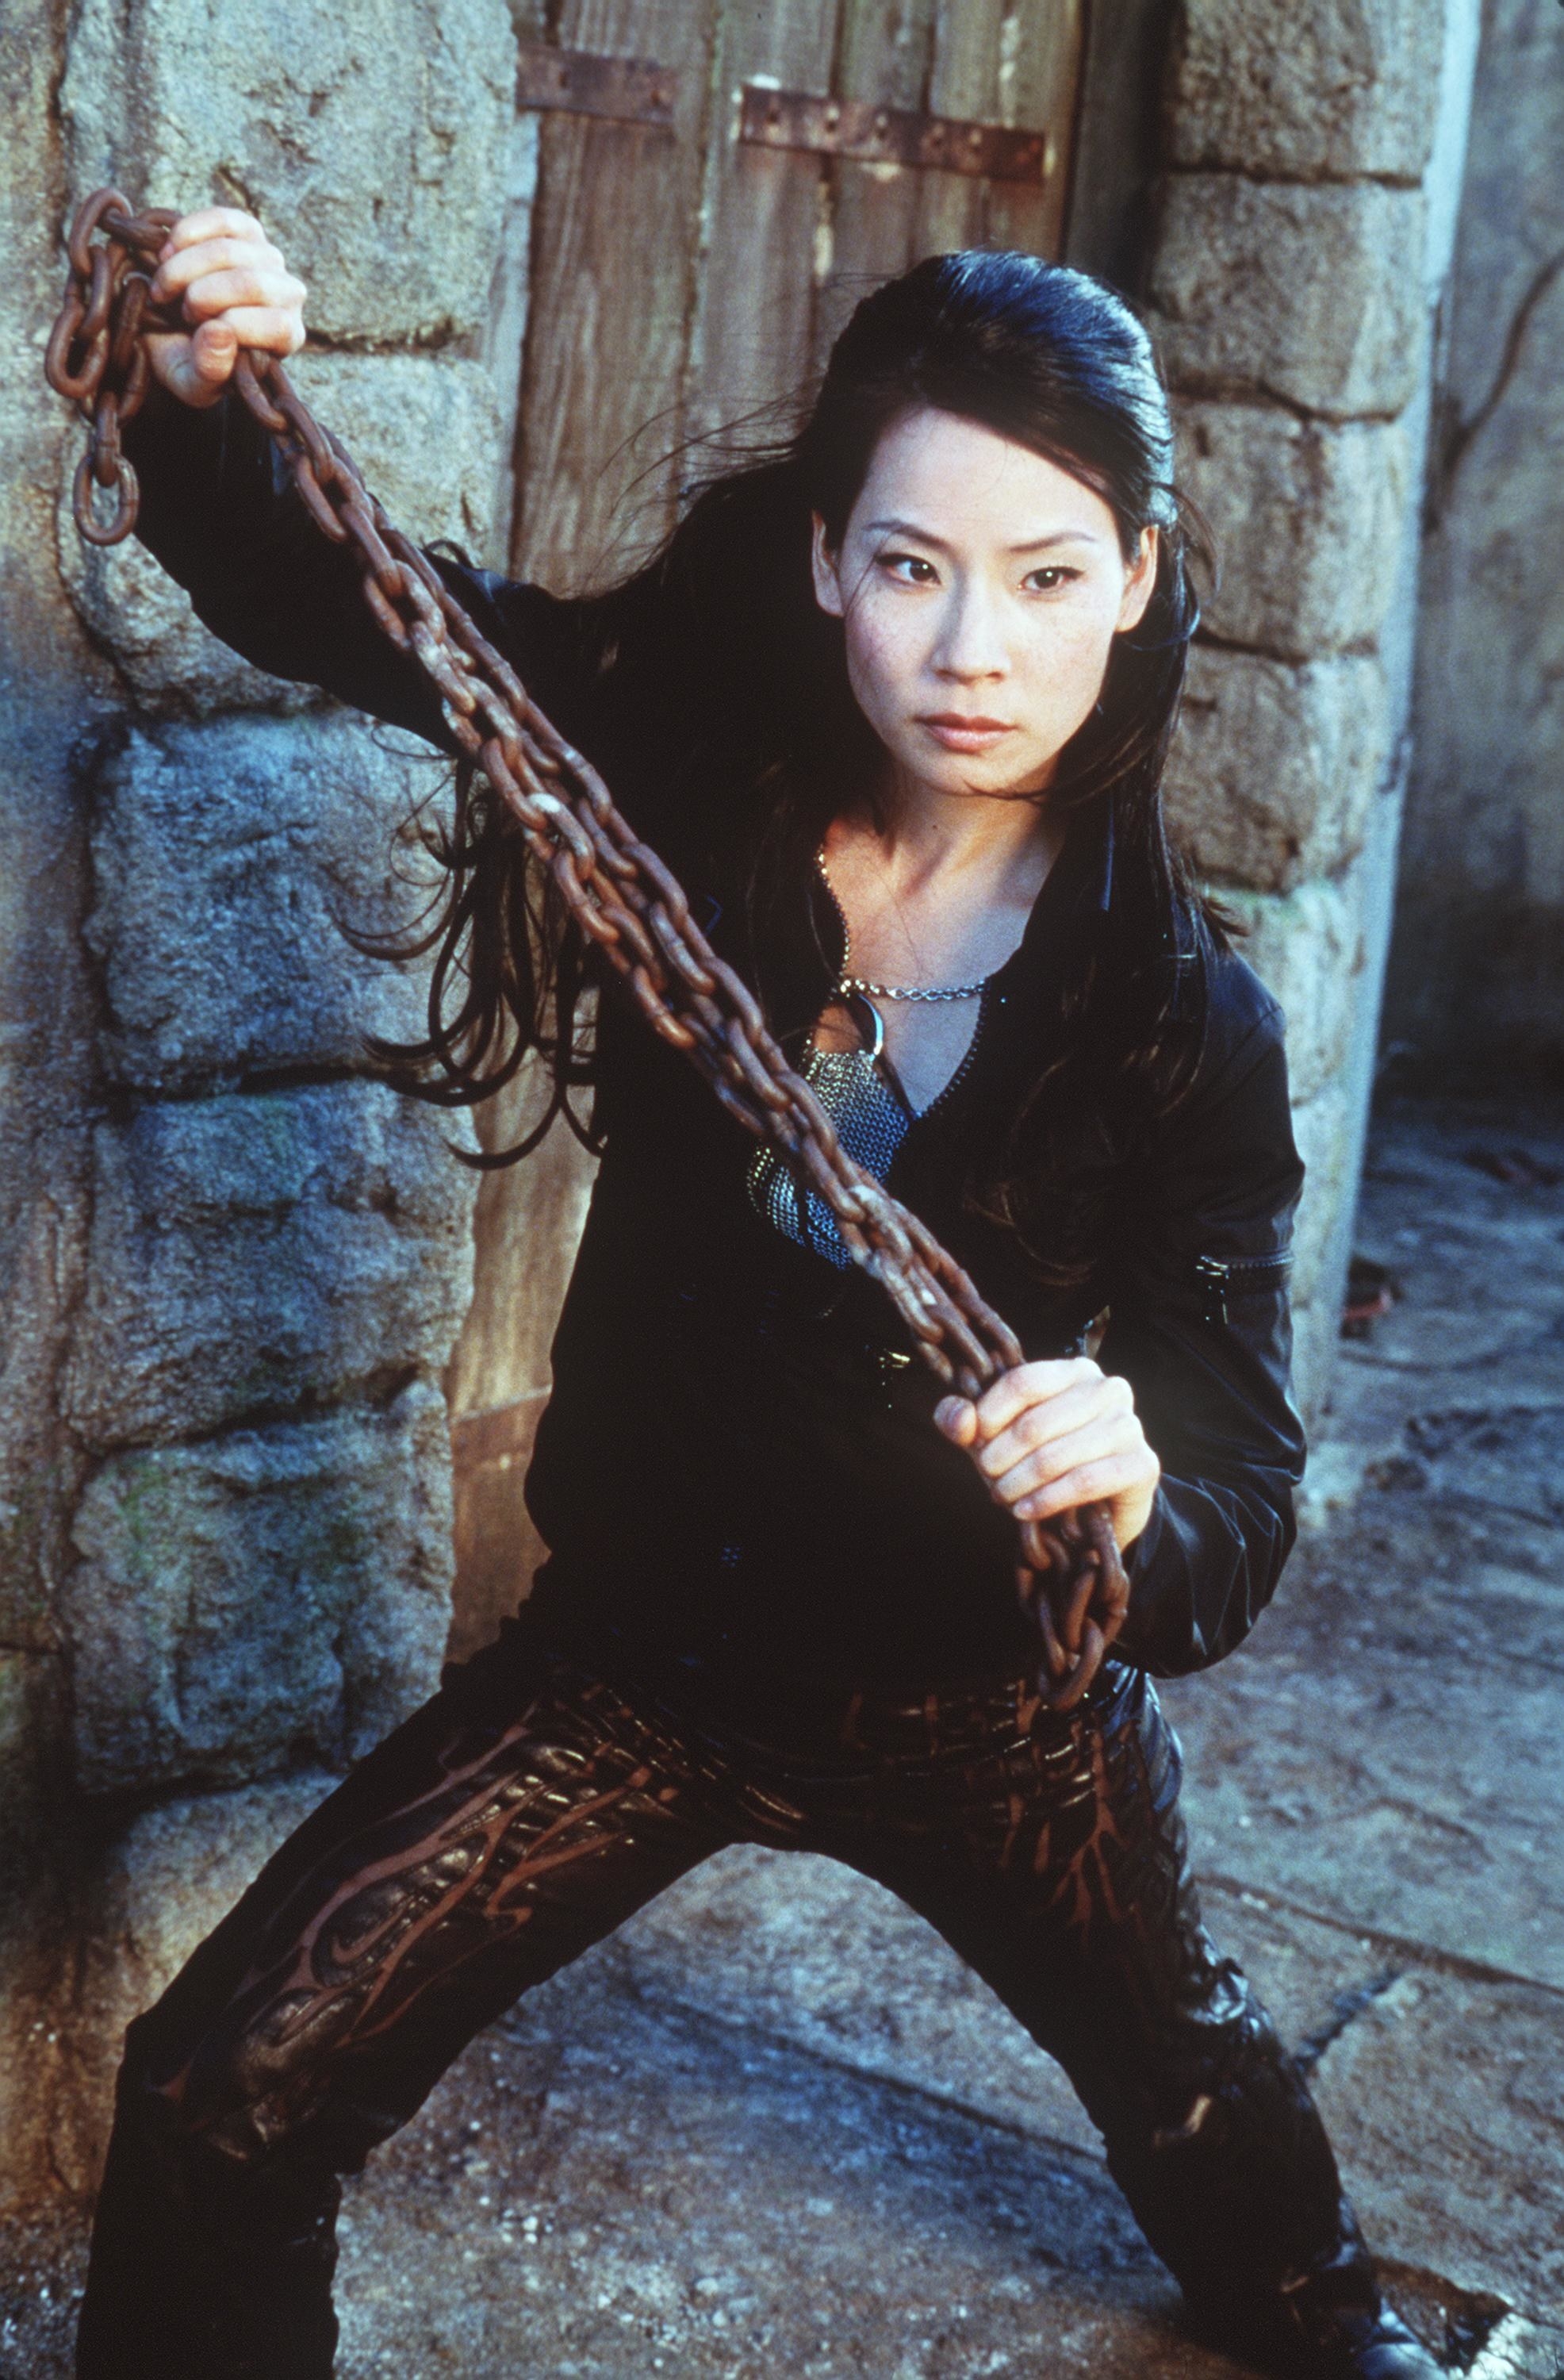 Liu holding chain and posing in a promotional shot for Charlies Angels